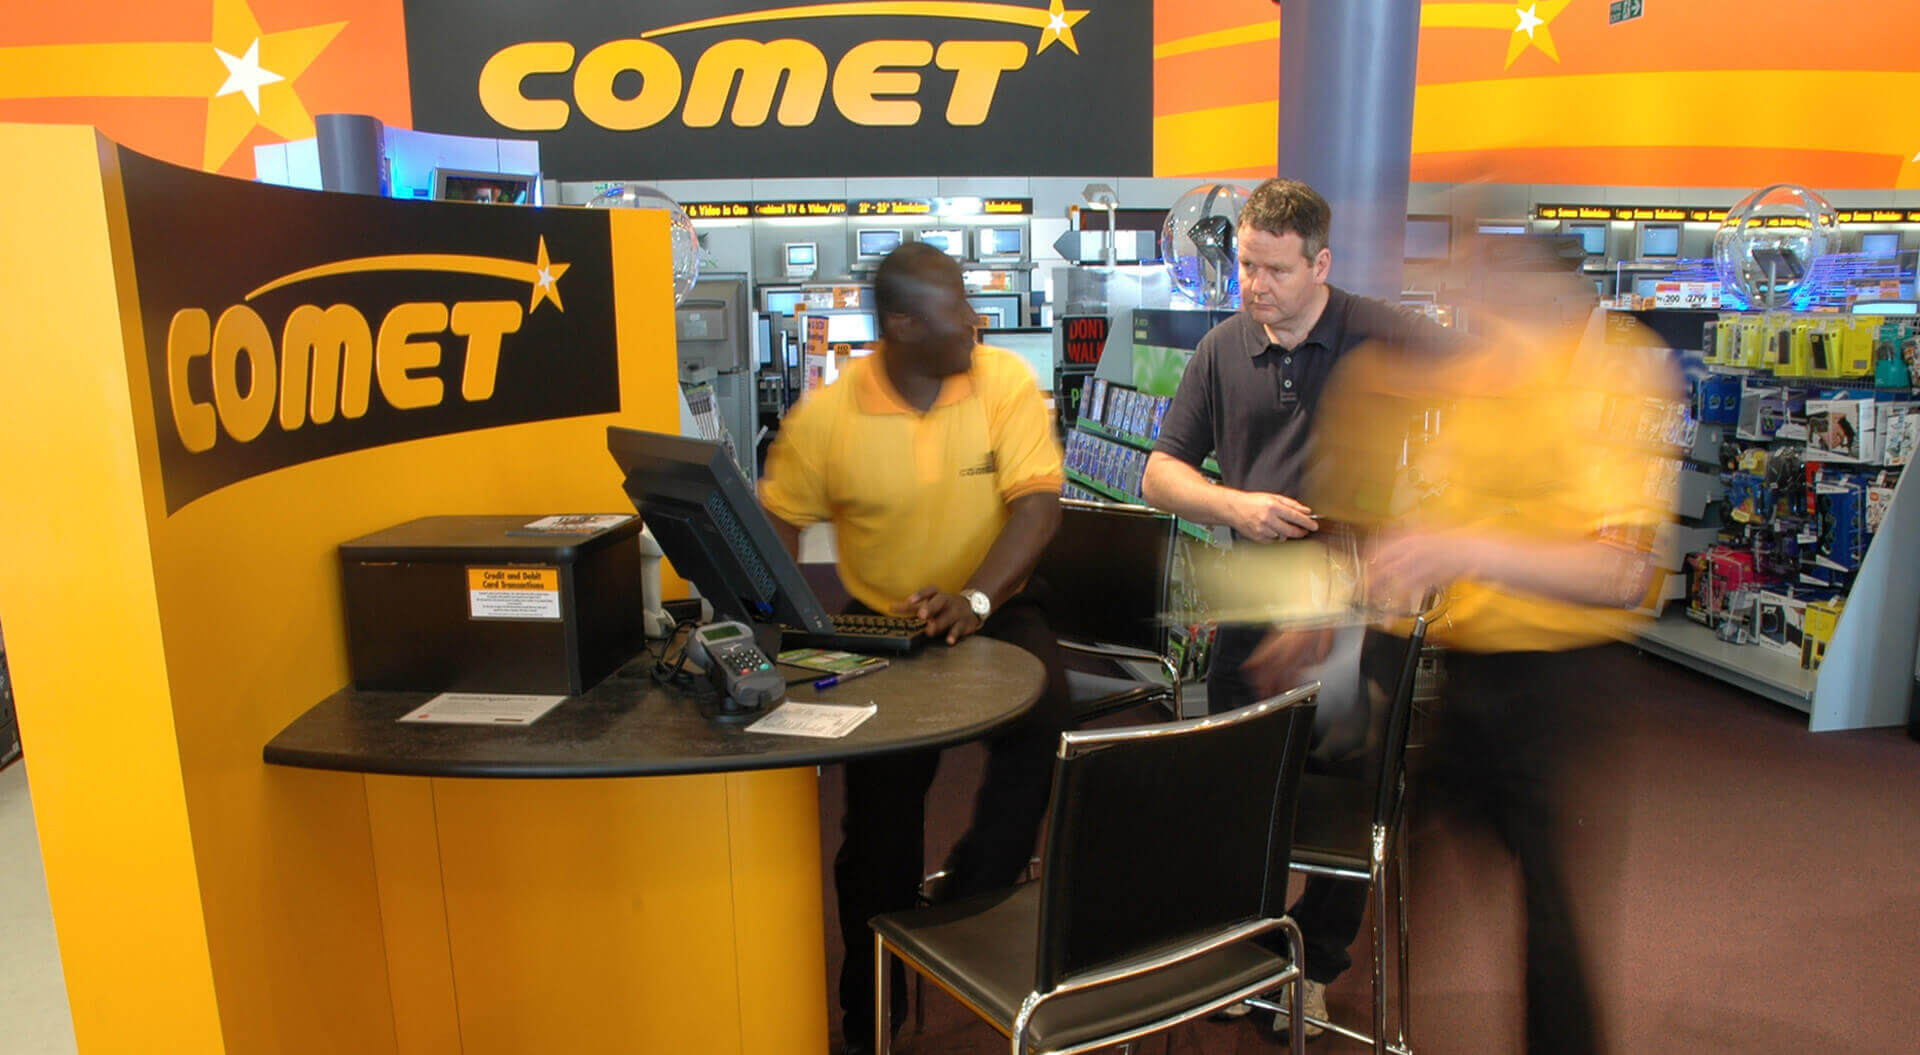 Comet Technology Store rebrand and interior design consultation point